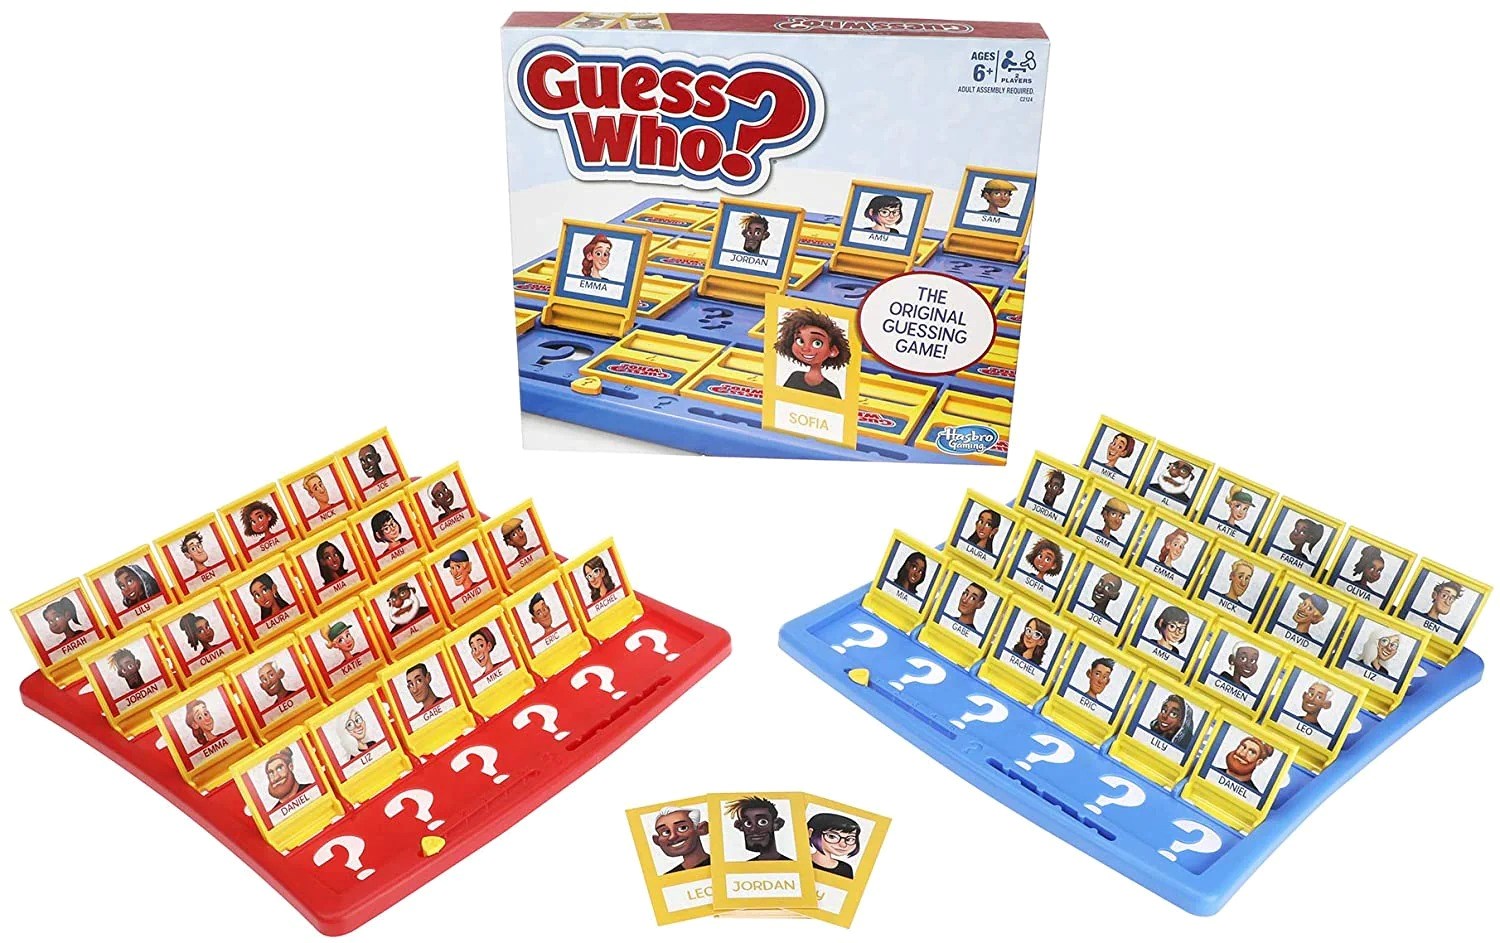 16 Astonishing Facts About Guess Who